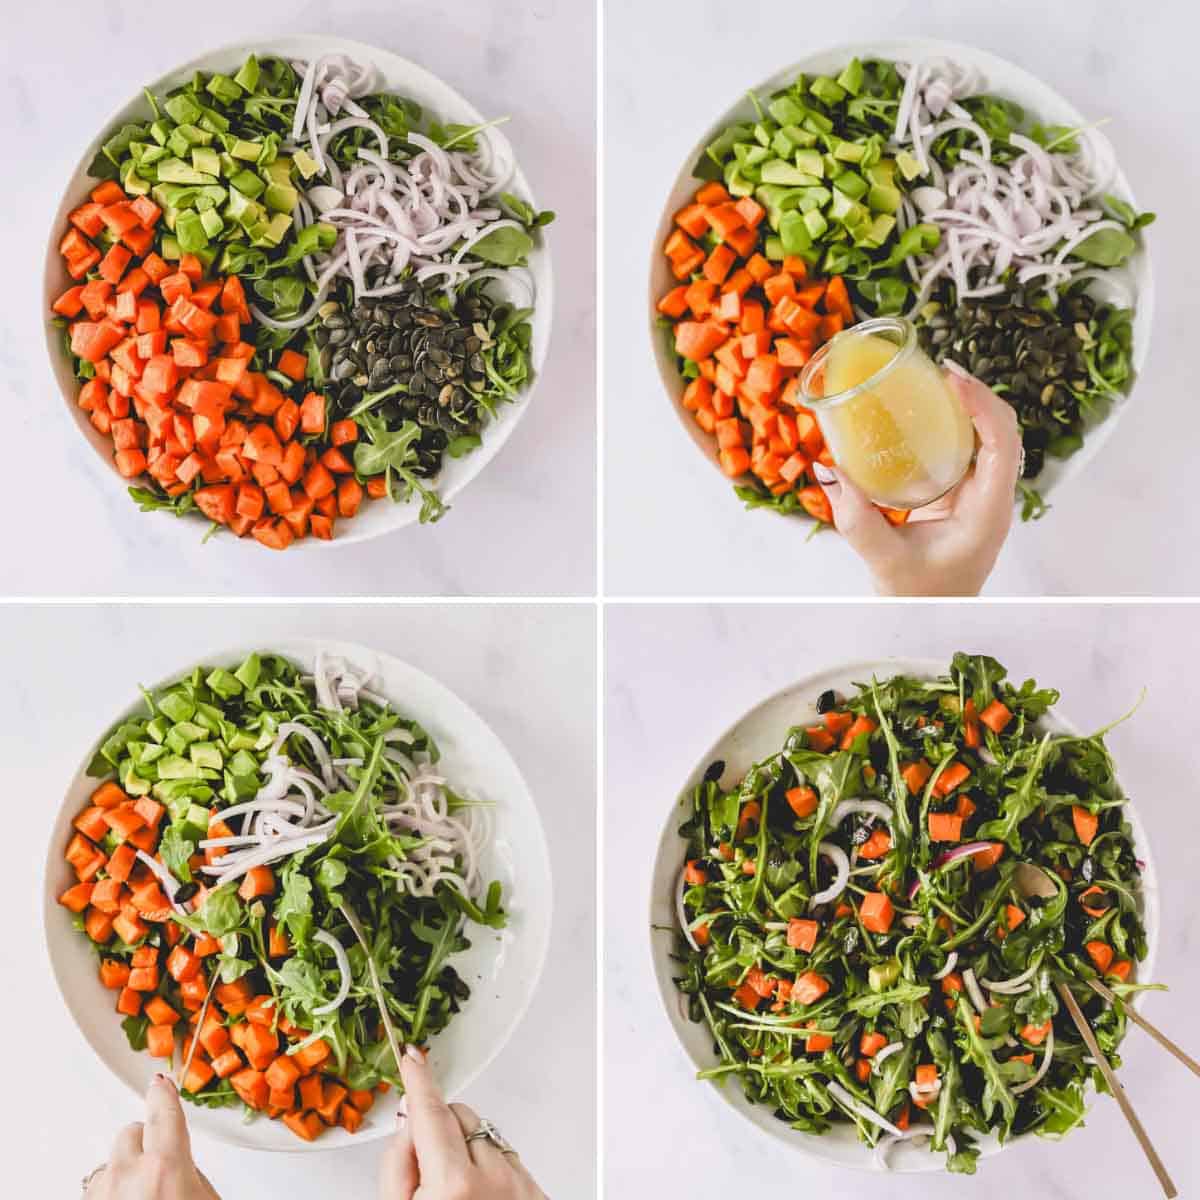 Four images showing the process of dressing a sweet potato salad.